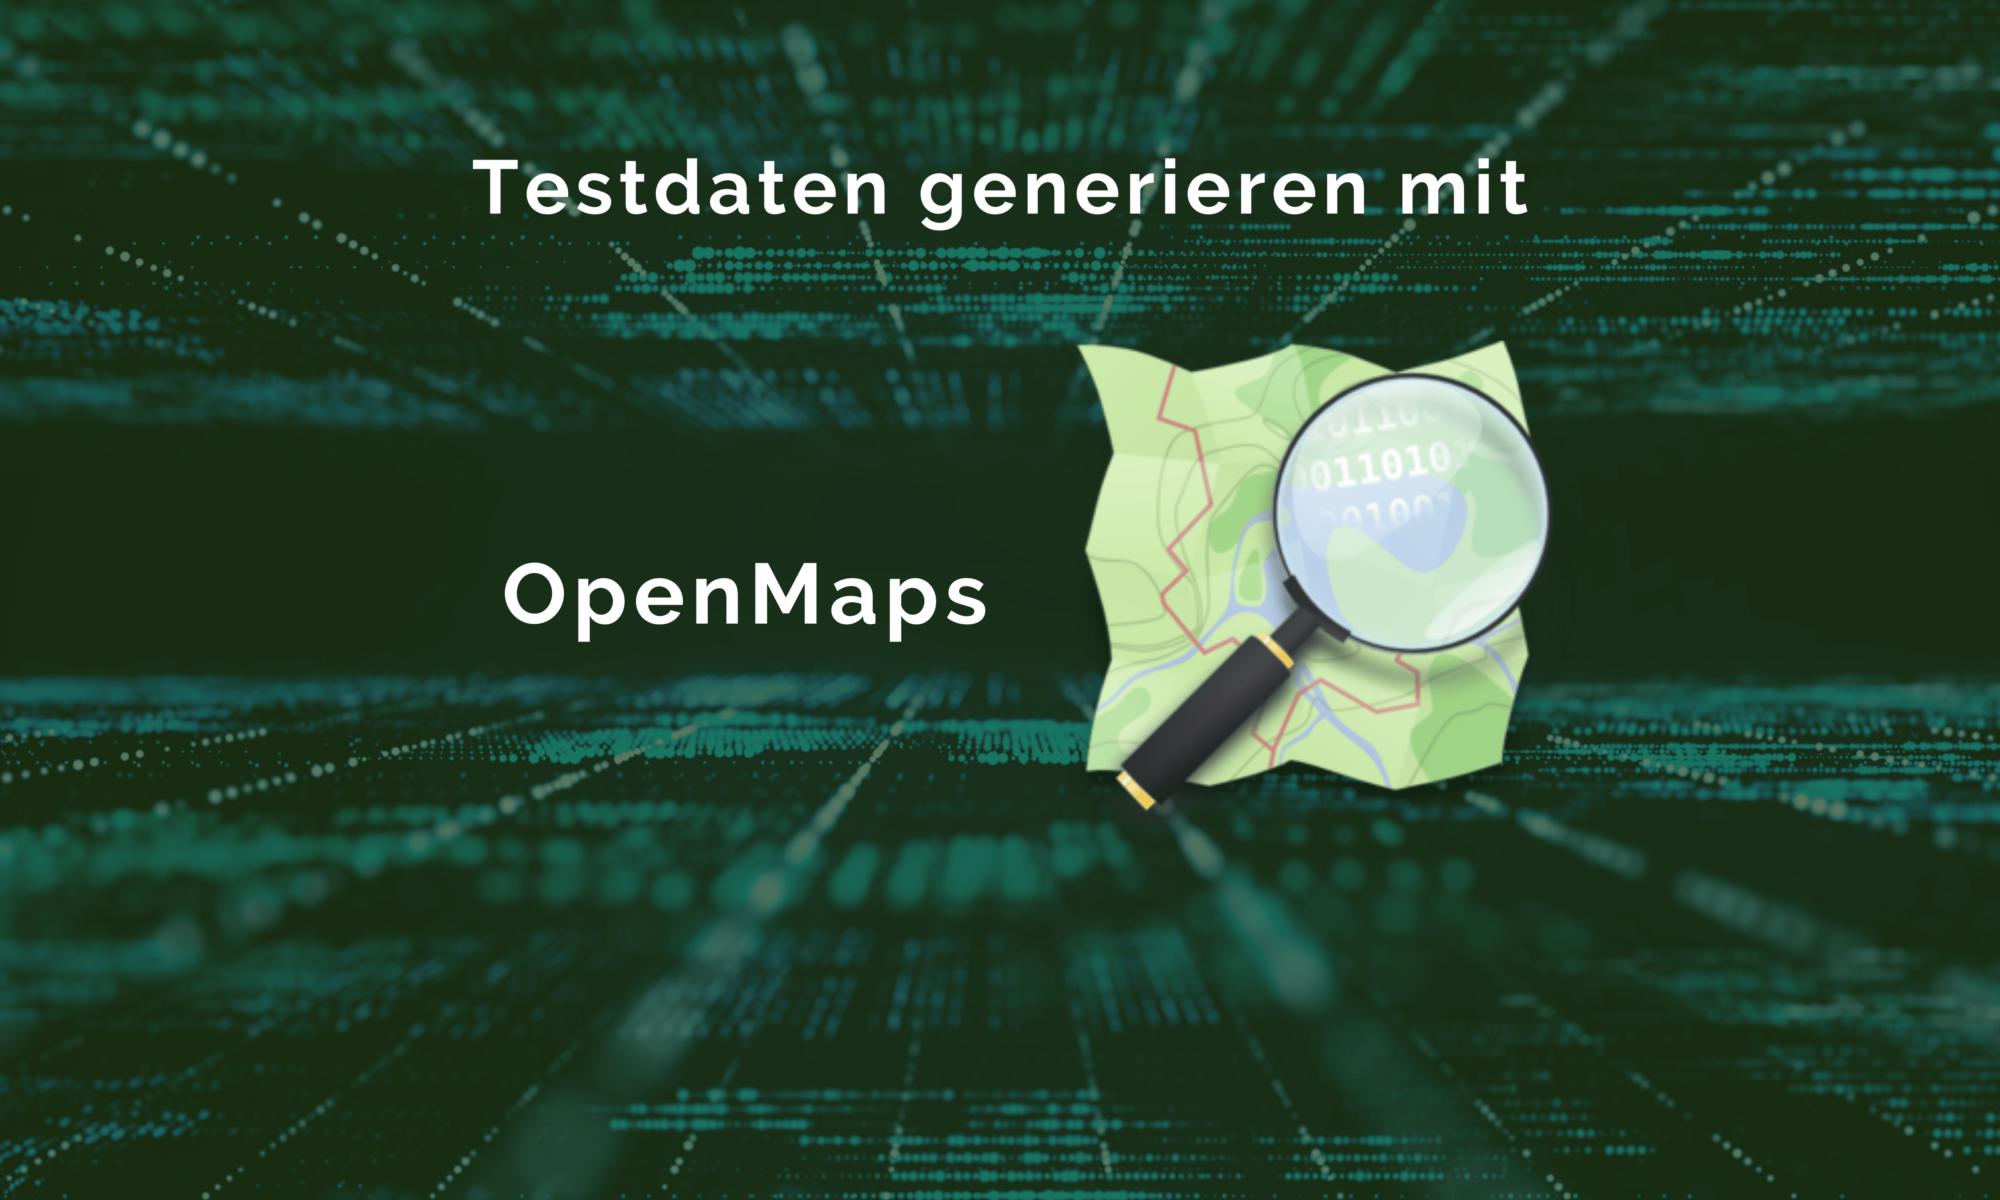 picture blog post testdata open maps